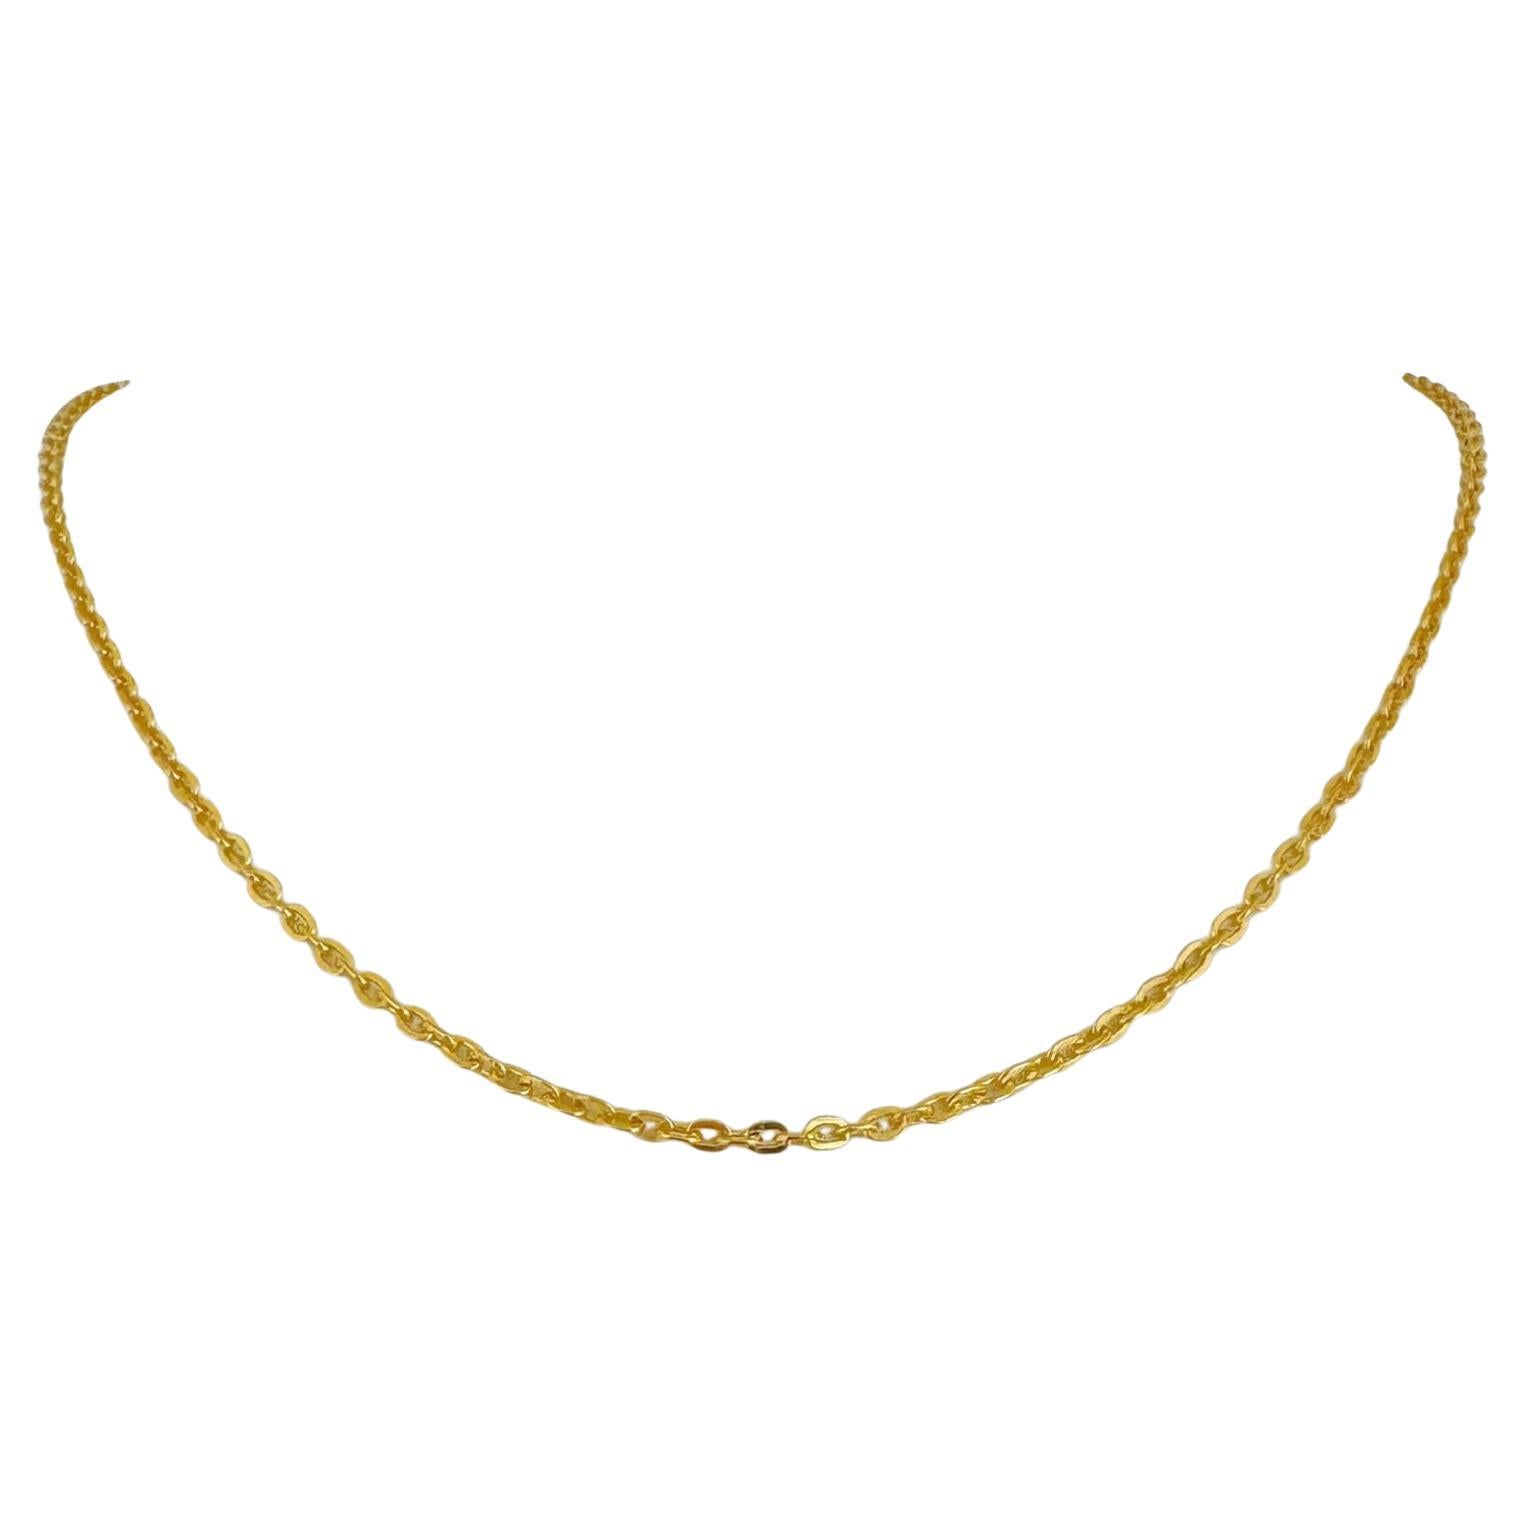 24 Karat Pure Yellow Gold Solid Thin Cable Link Chain Necklace 